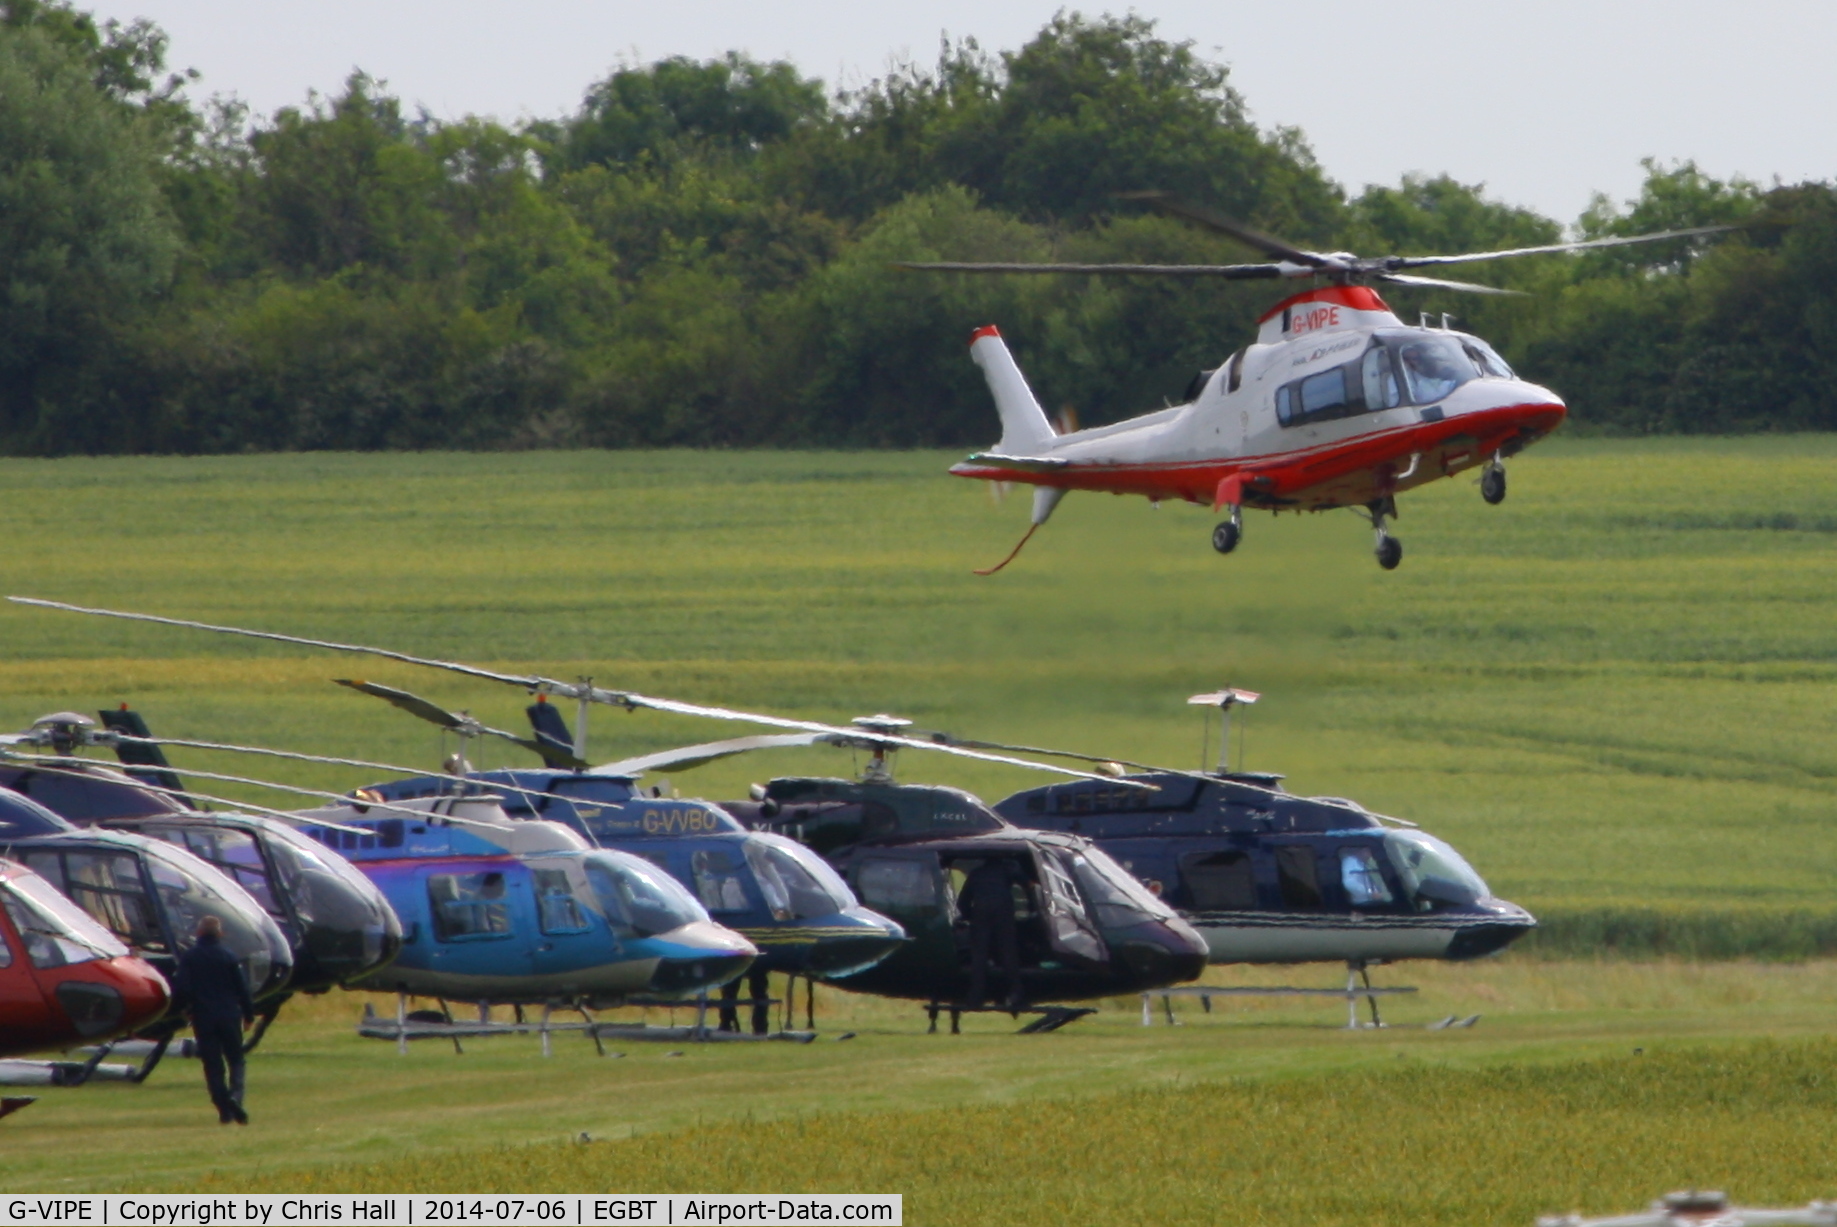 G-VIPE, 2007 Agusta A-109E Power C/N 11692, being used for ferrying race fans to the British F1 Grand Prix at Silverstone